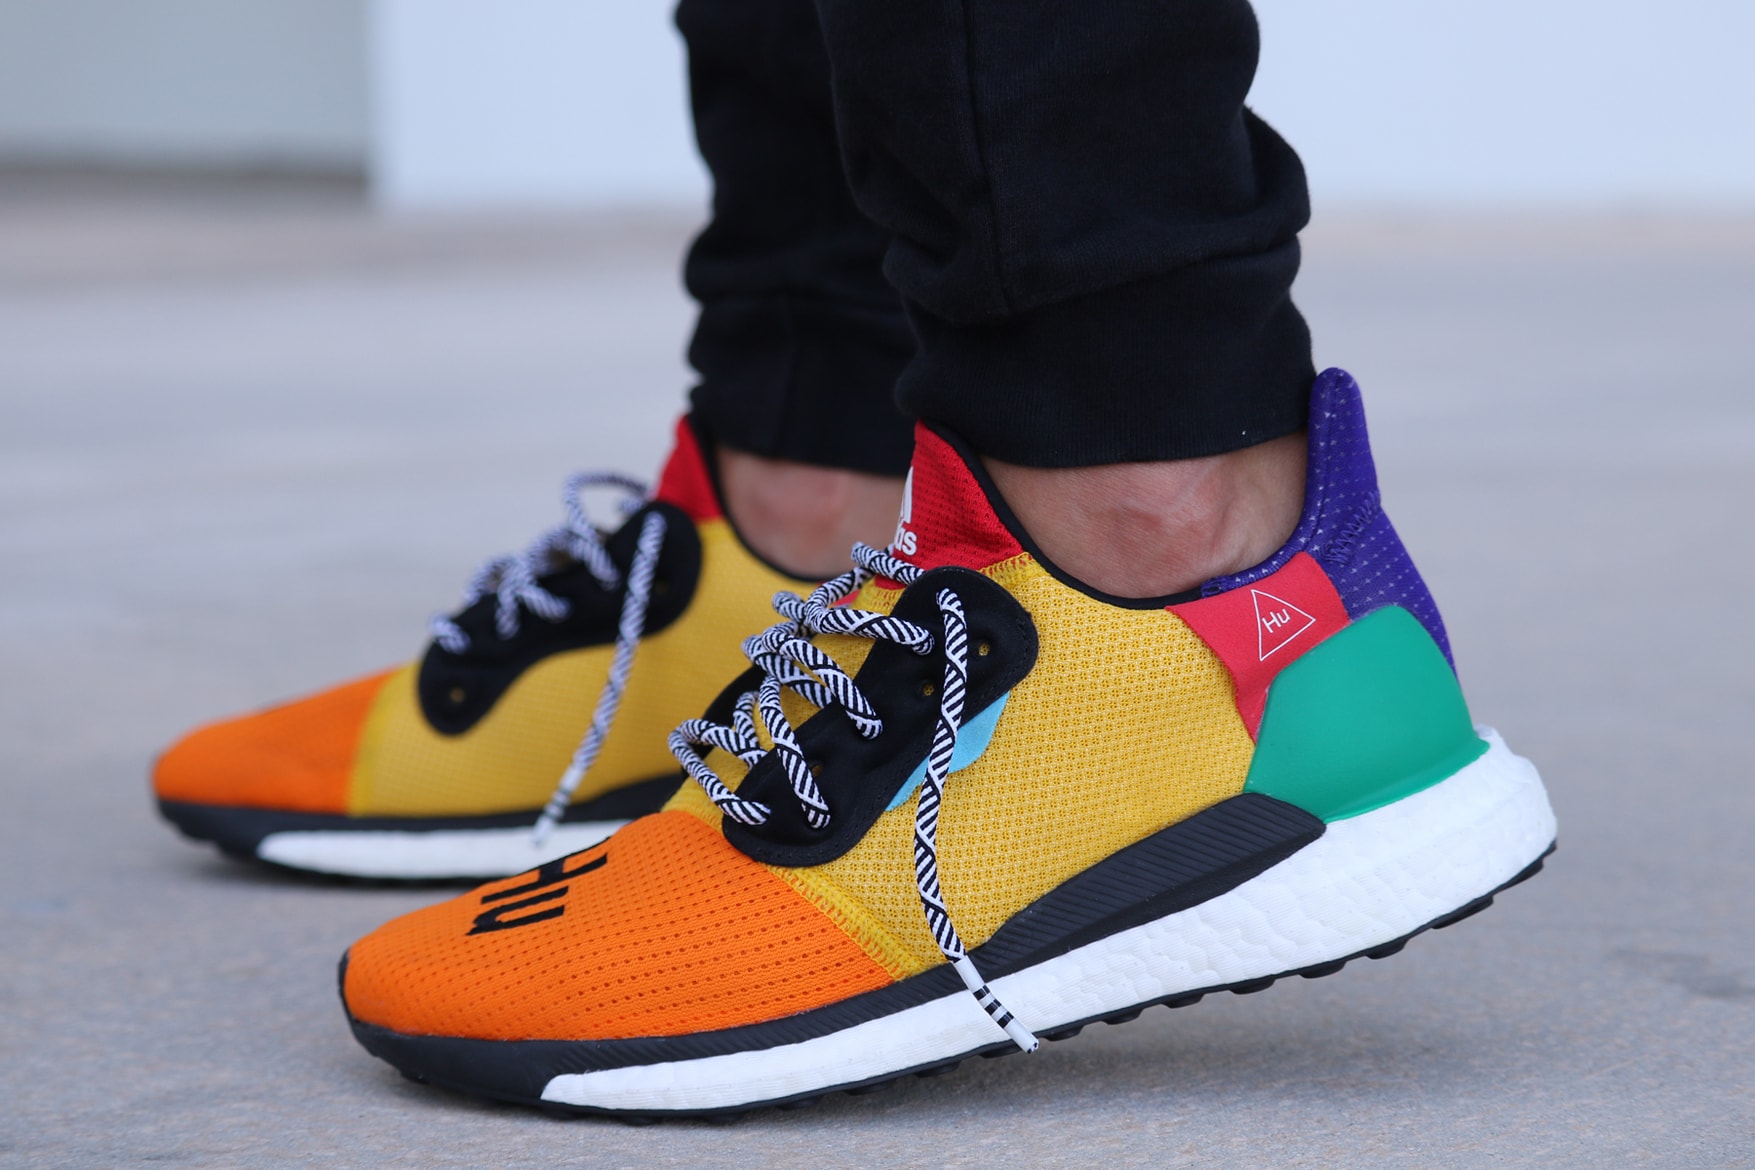 Pharrell adidas Solar Hu Glide ST Early Look rainbow colorway boost midsole yellow orange blue pink black white green pattern laces collaboration drop on foot side black